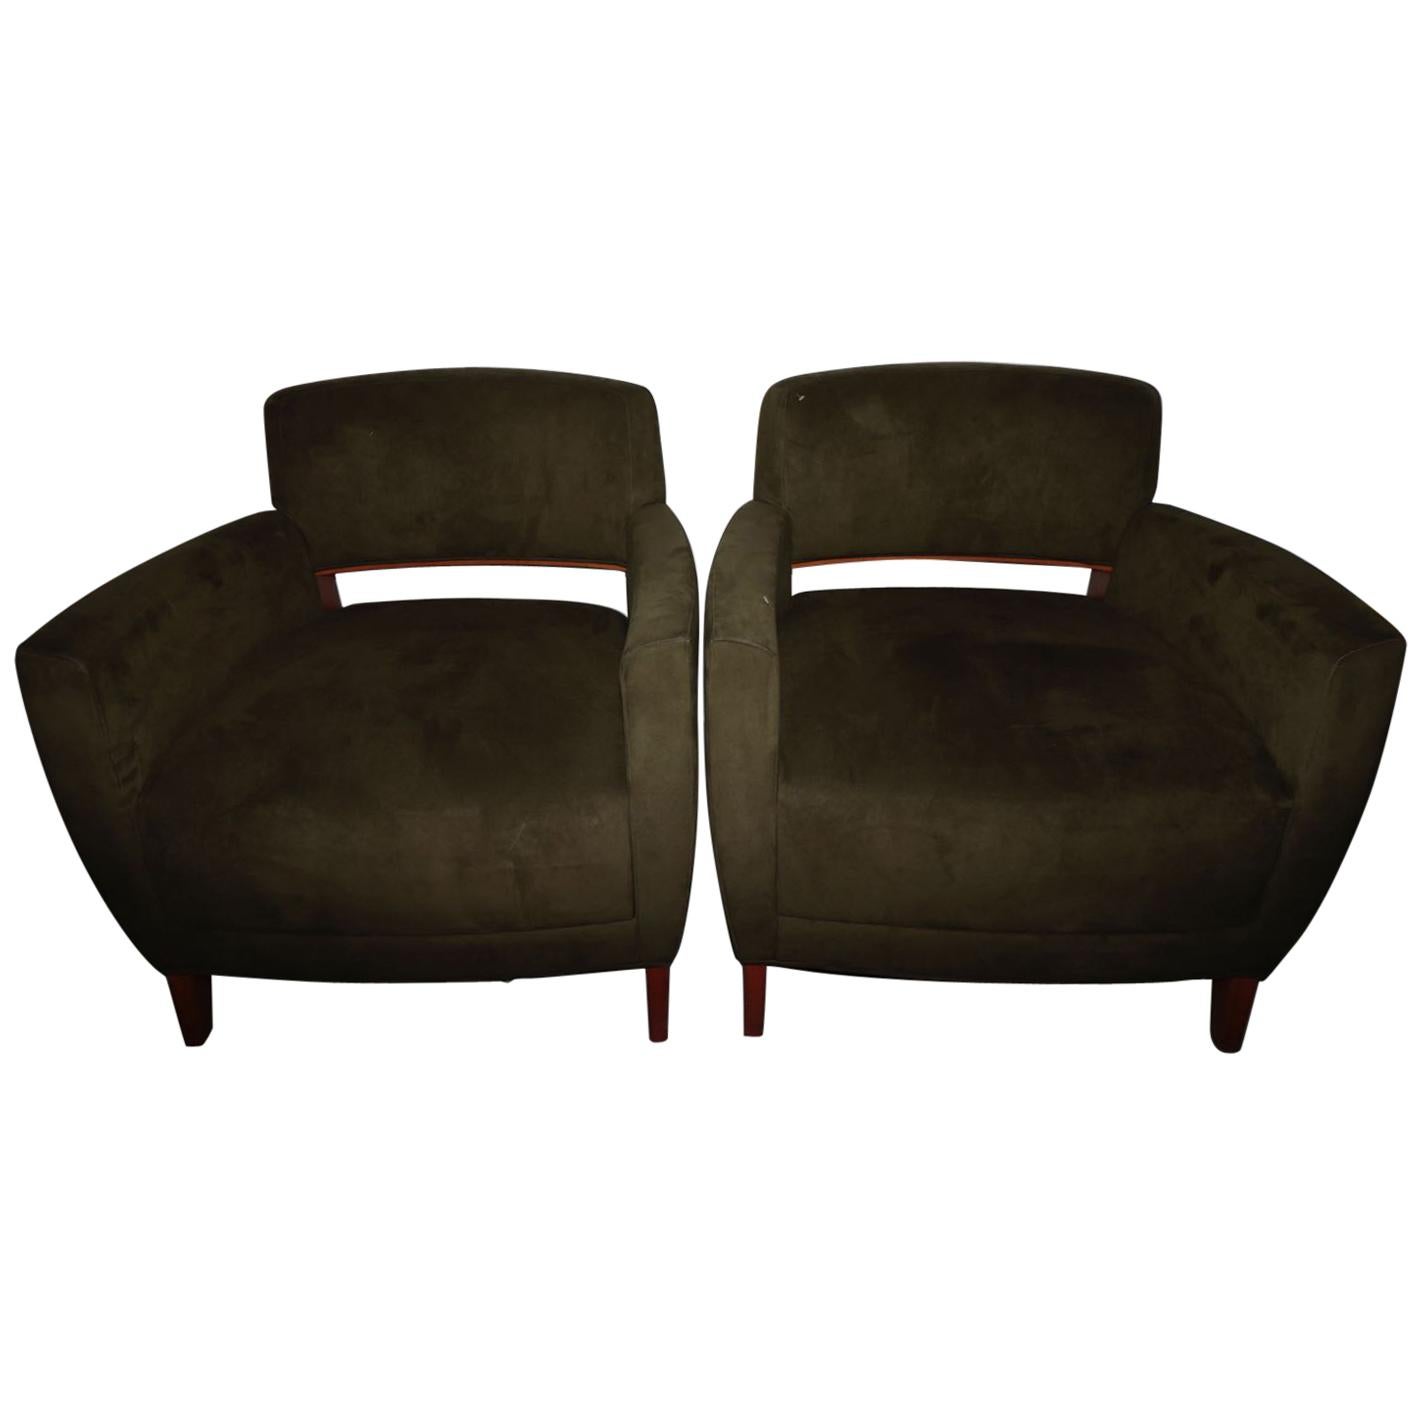 Awesome Pair of 1970s Streamlined and Cool! Midcentury Bernhardt Club Chairs For Sale